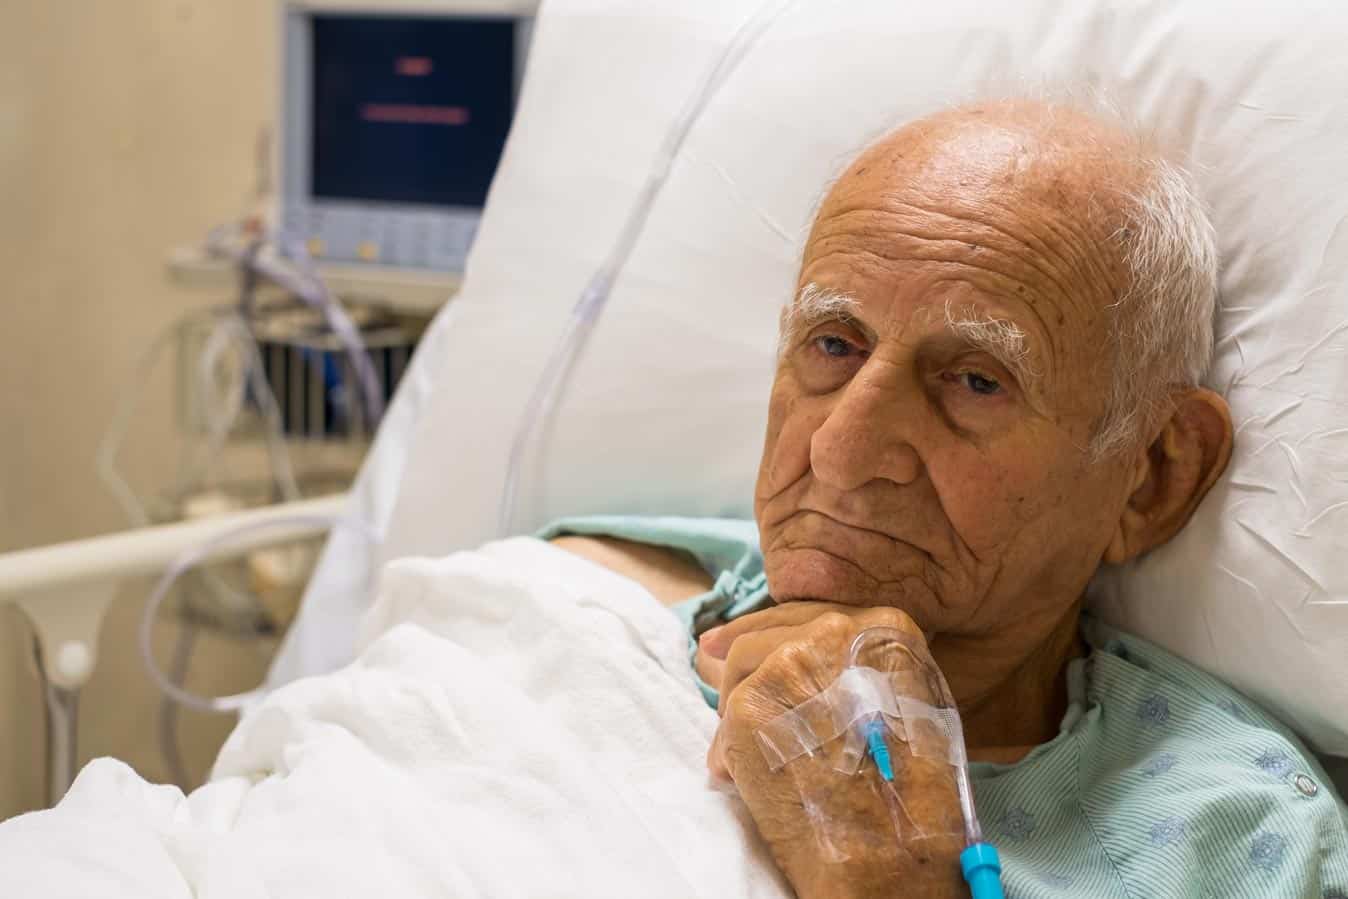 RNs-and-delirium-recognition-in-older-people2